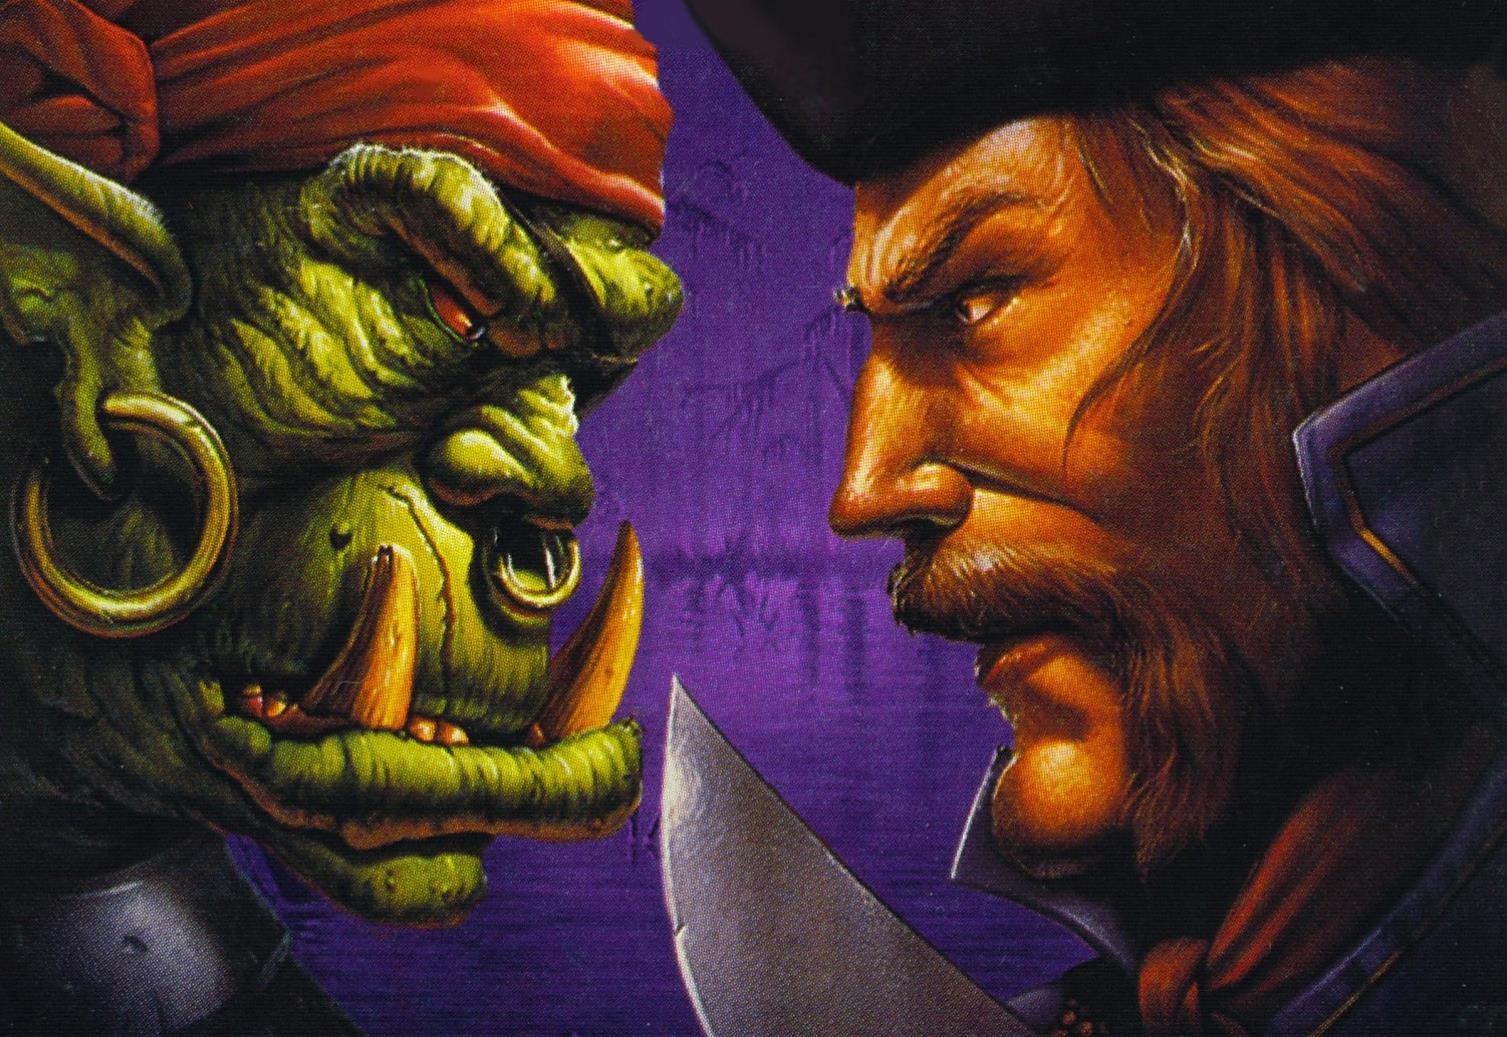 Image for Warcraft 1 & 2 remasters not happening because they're "not that fun any more"